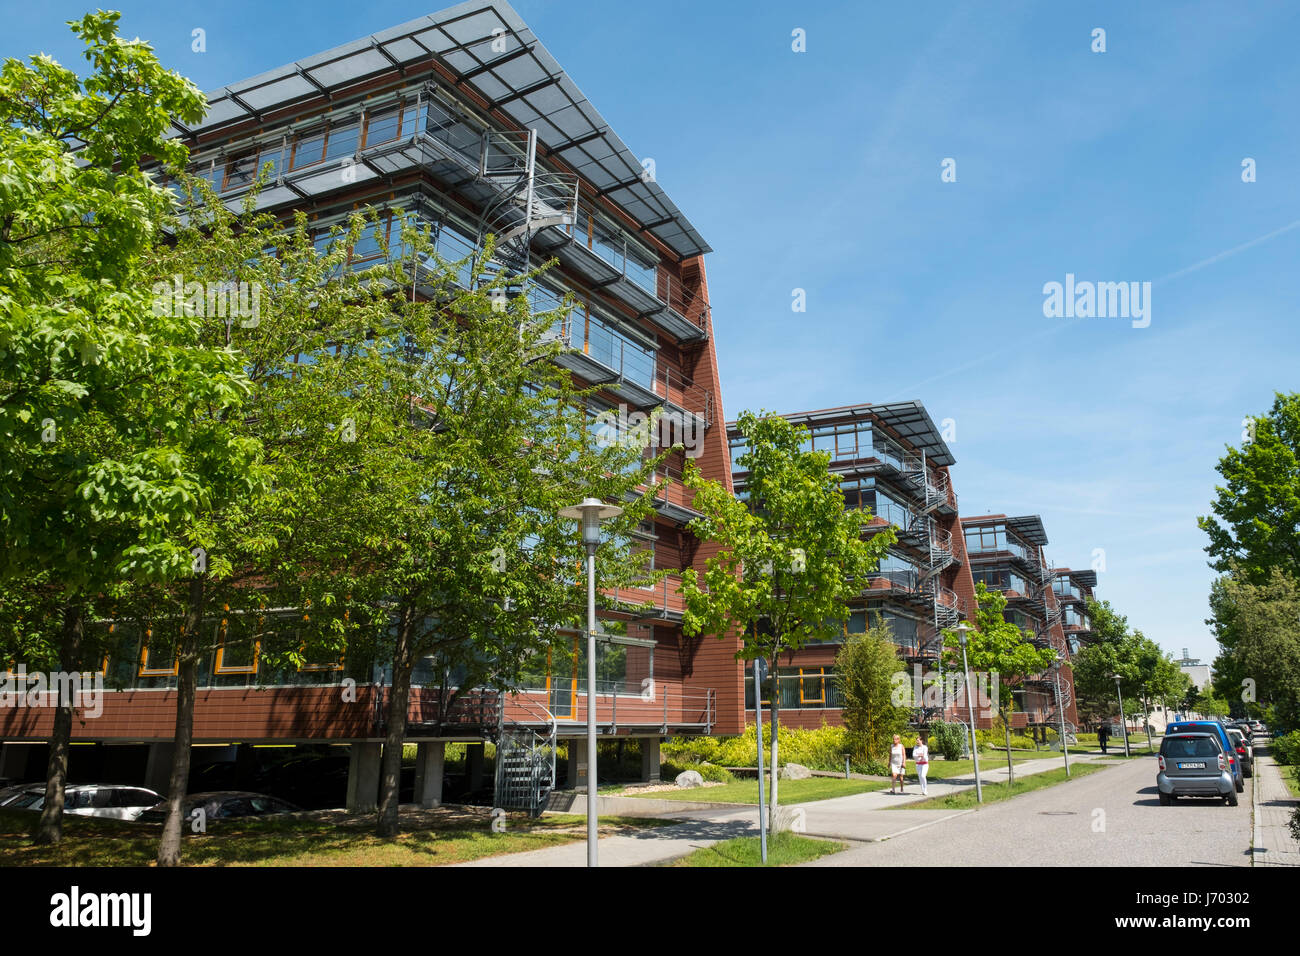 Institutes of Computer Science and Mathematics buildings  at Adlershof Science and Technology Park  Park in Berlin, Germany Stock Photo